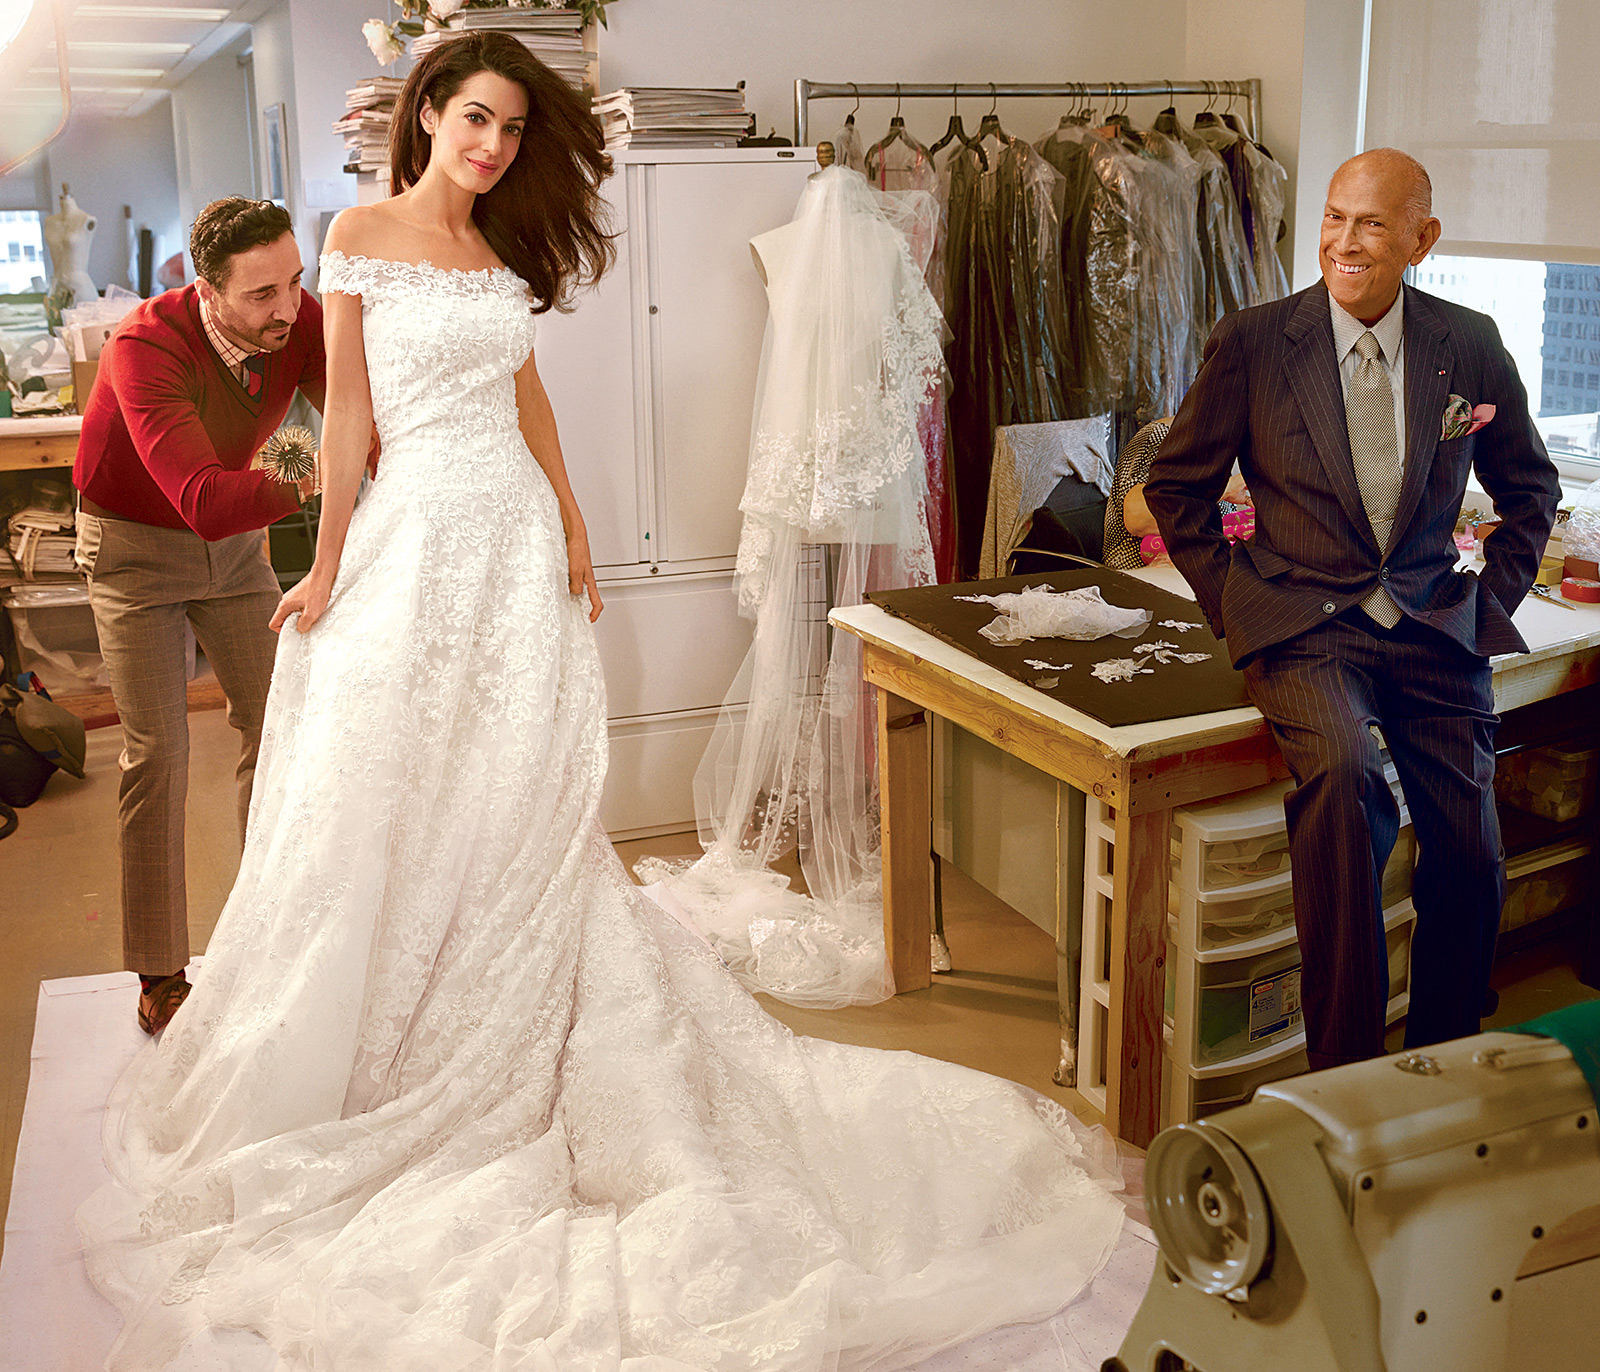 The Most Beautiful Celebrity Wedding Dresses of All Time